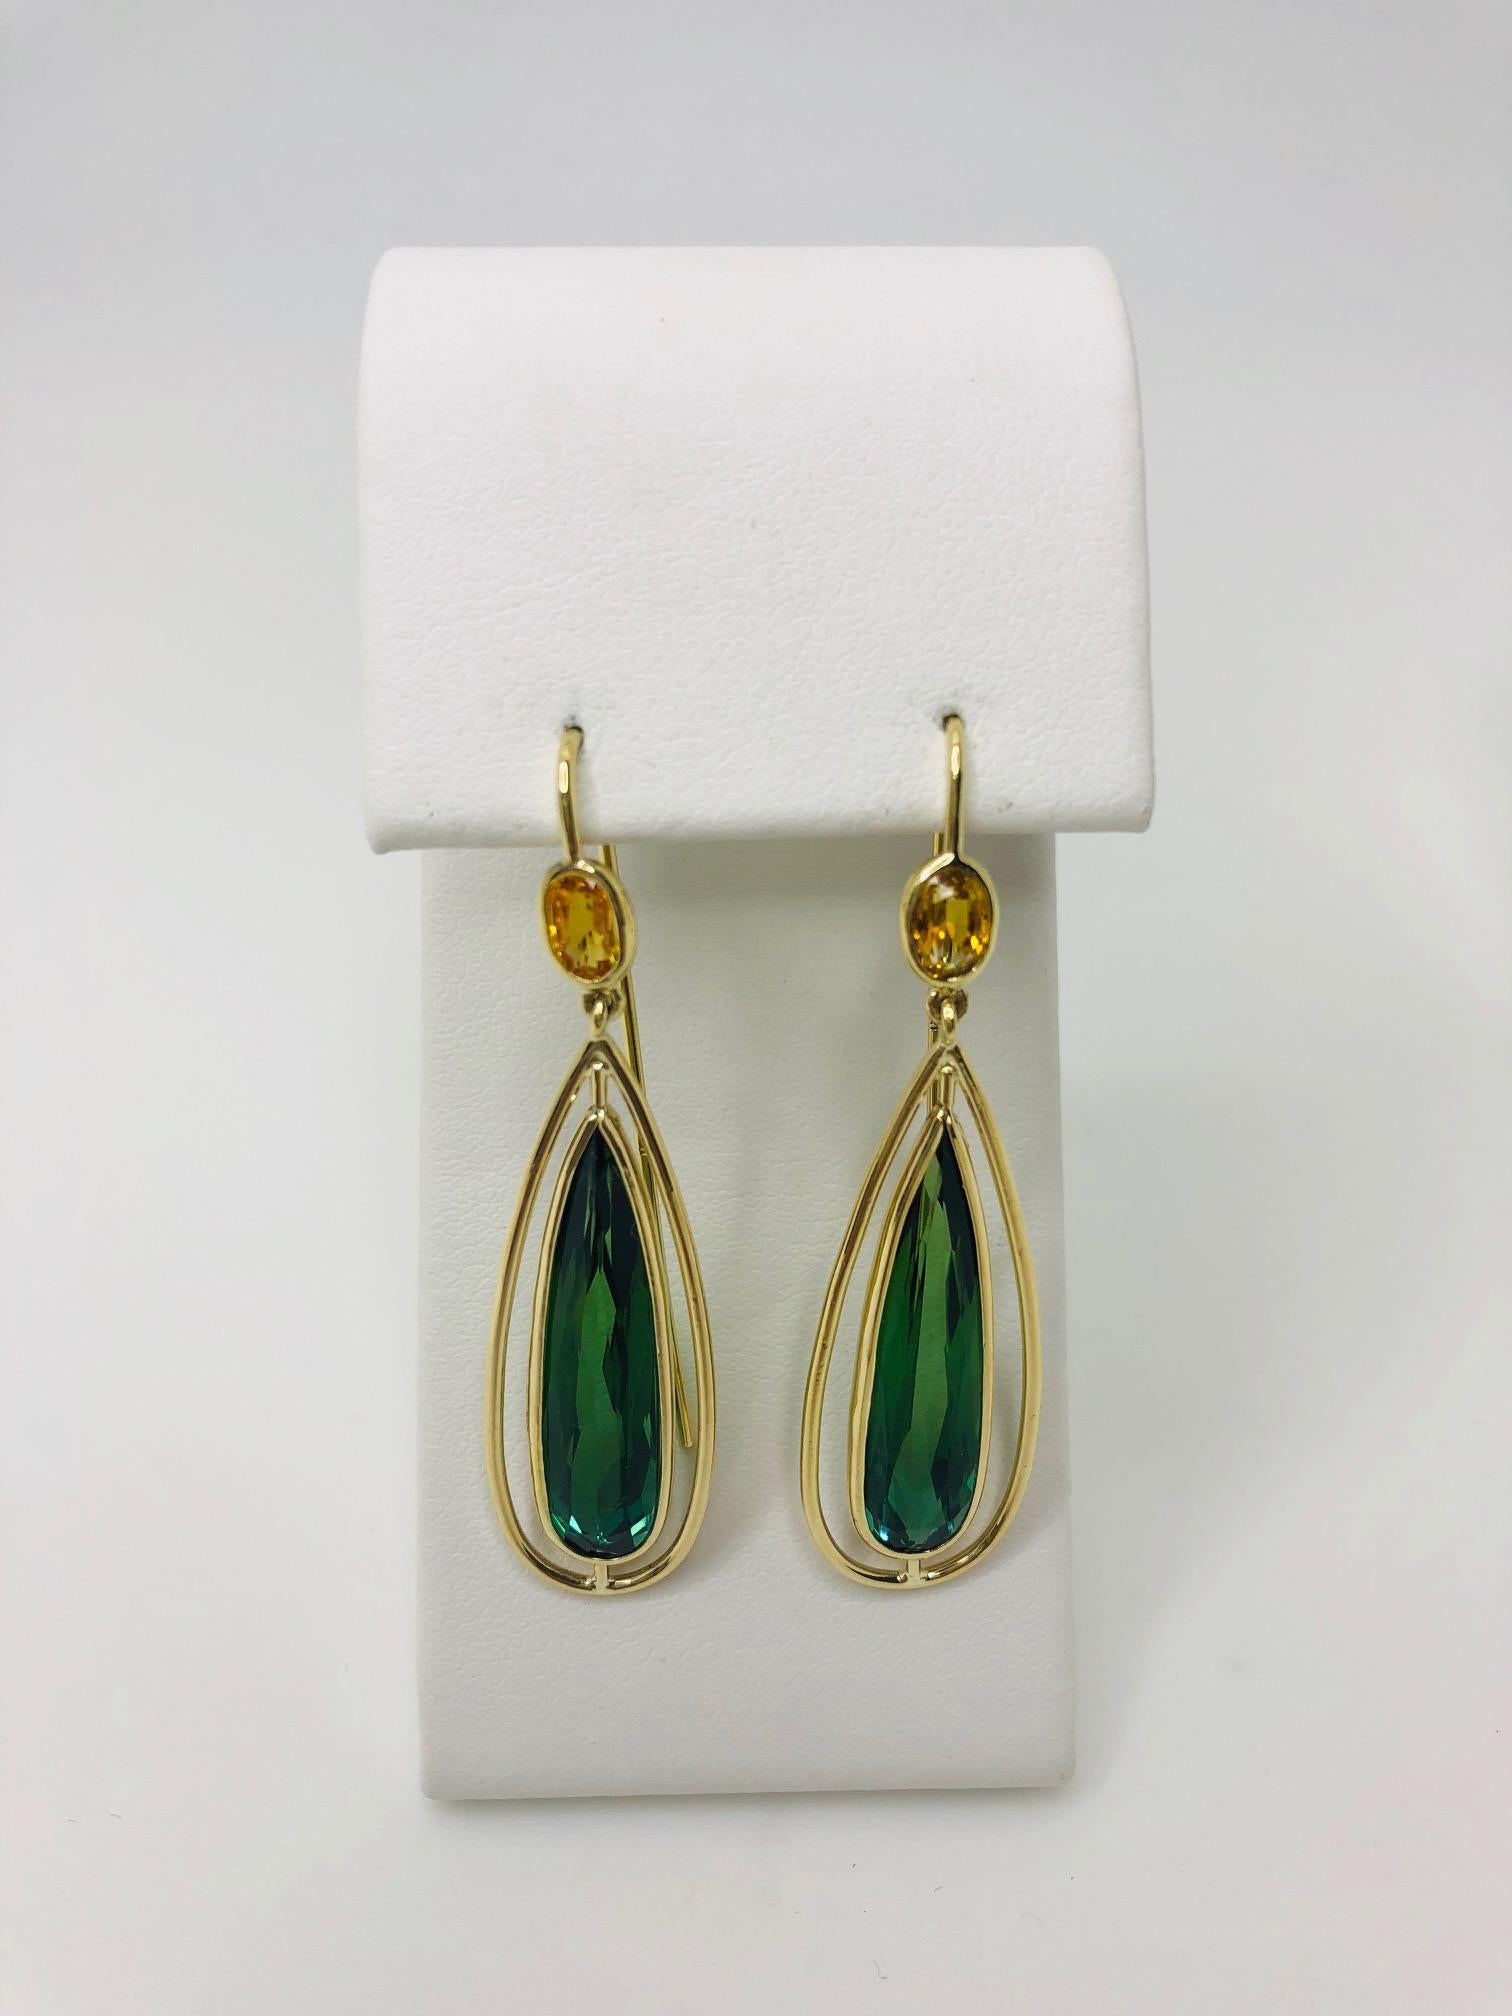  Green Tourmaline and Yellow Sapphire Dangle Earrings with Yellow Gold Halos For Sale 3